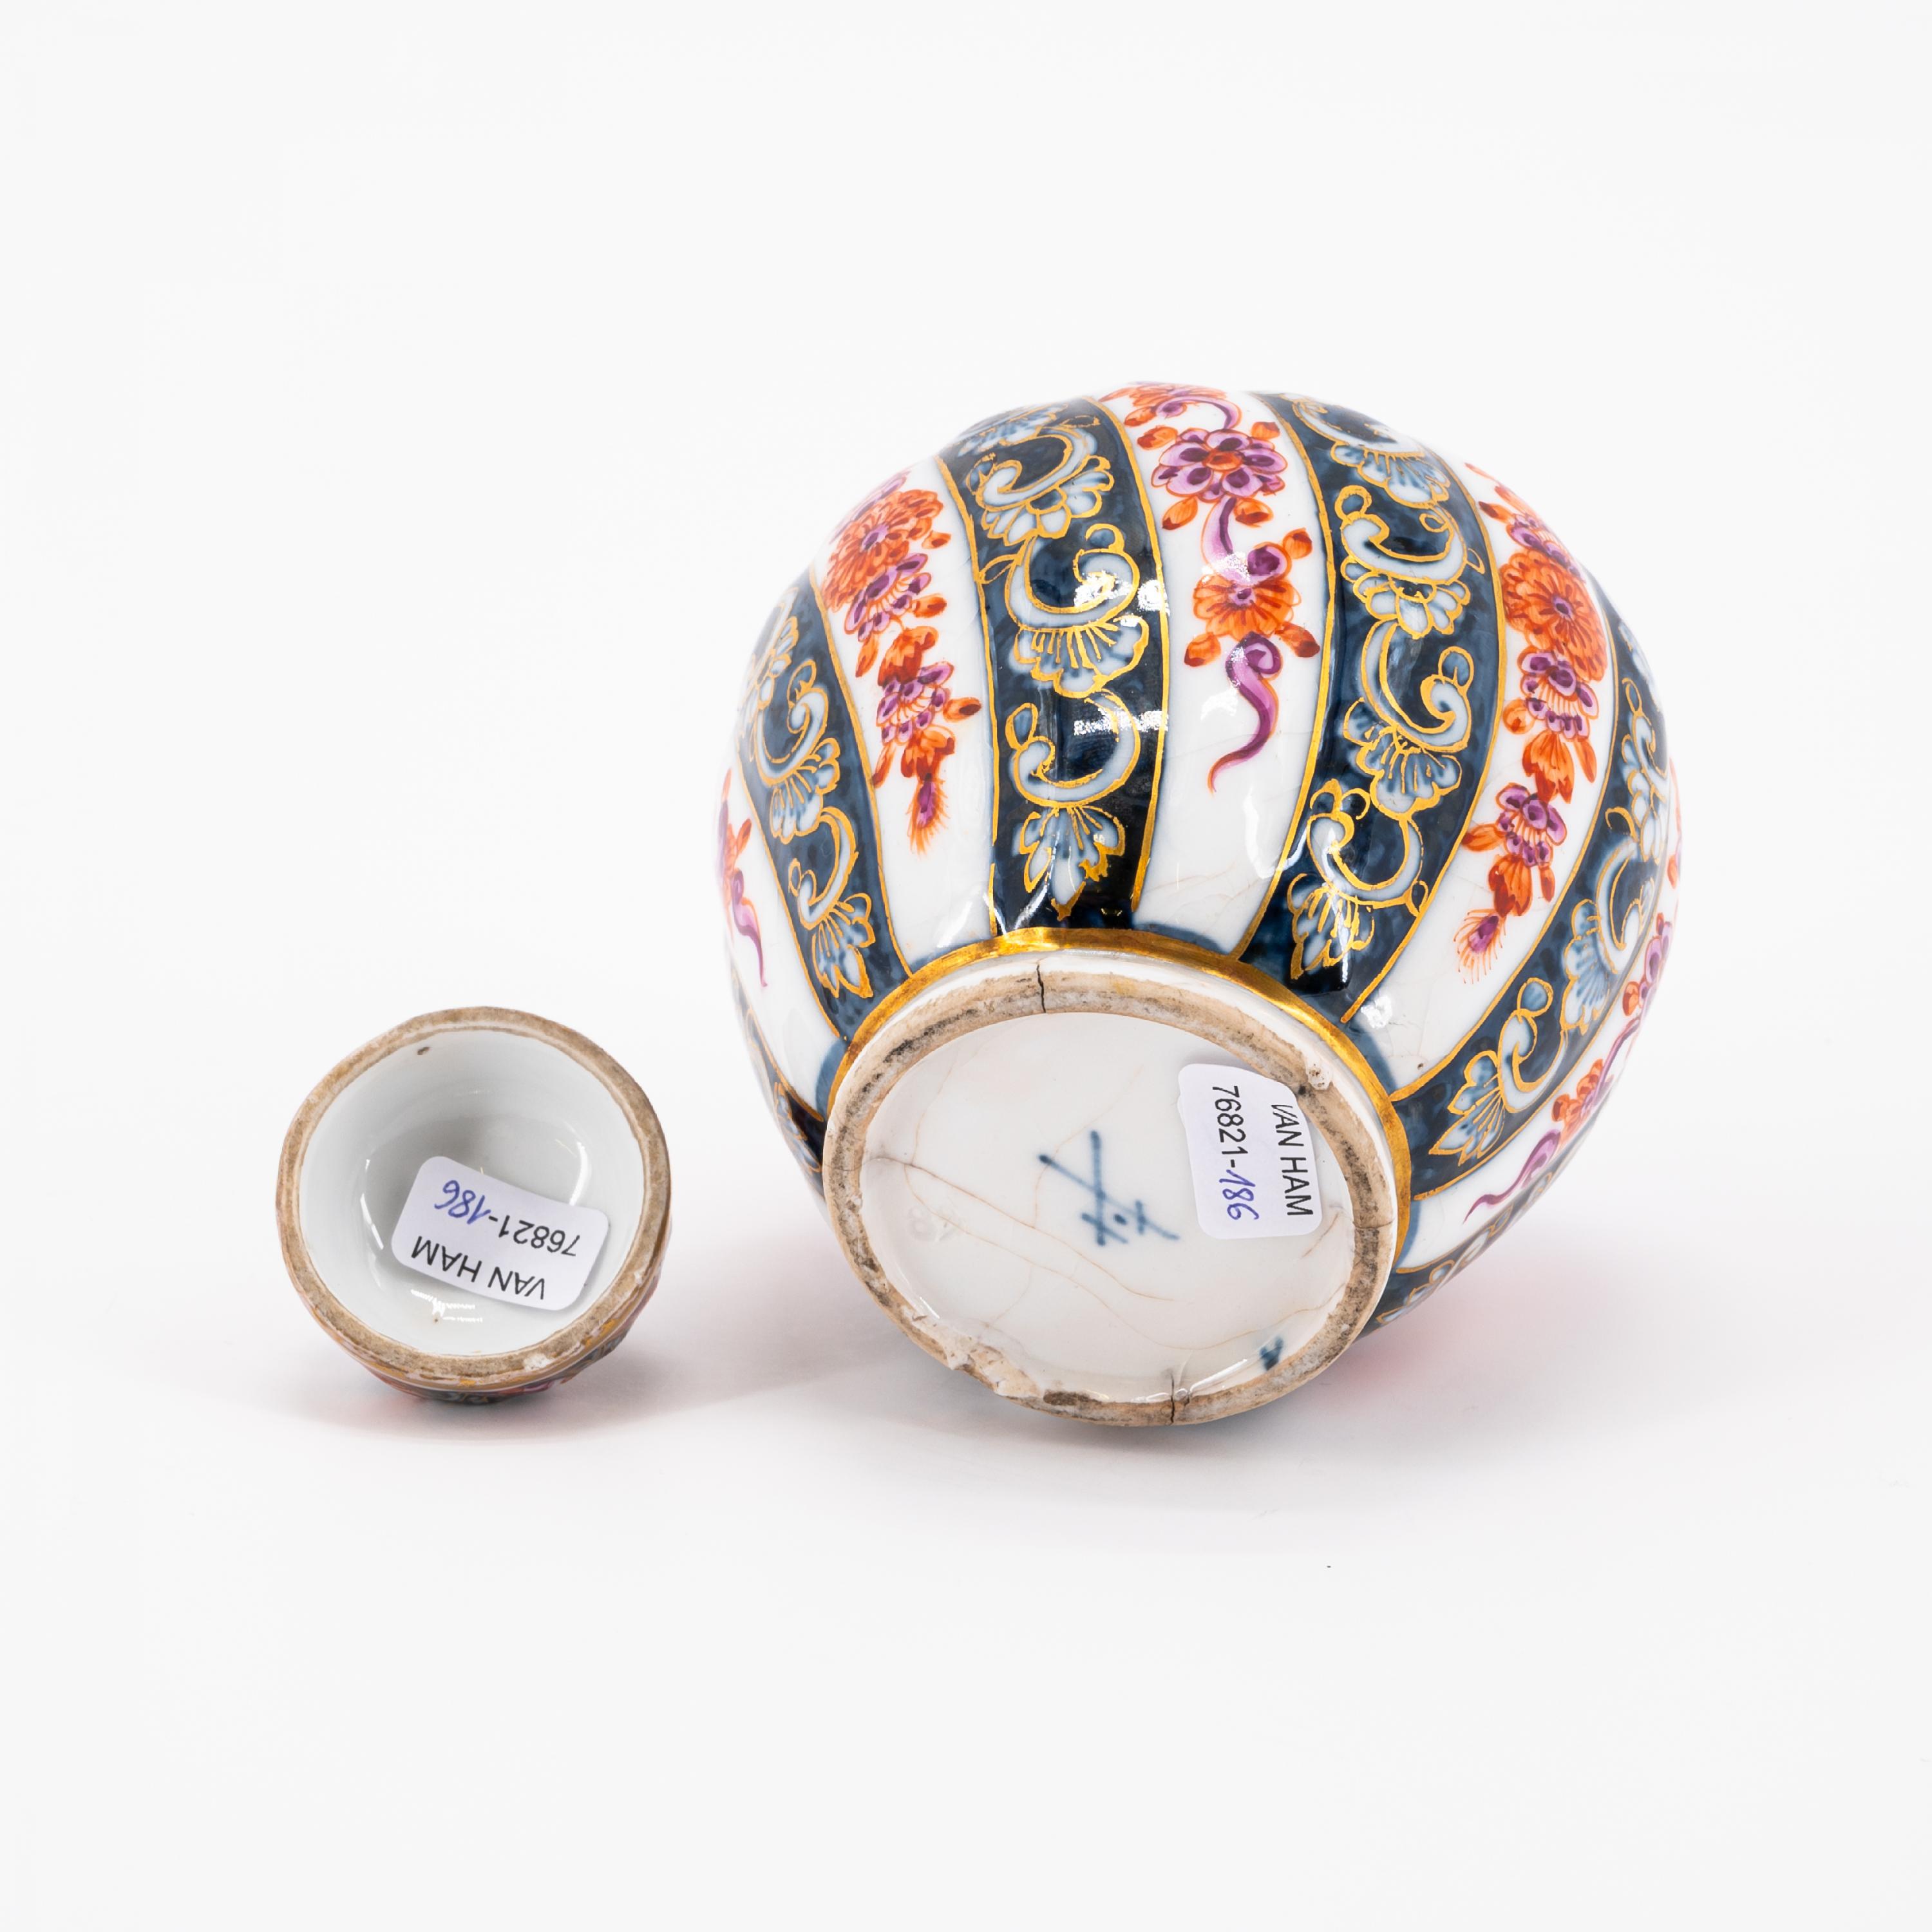 PORCELAIN TEA CADDY AND SAUCER WITH STRIPPED DECOR IN THE STYLE OF EAST ASIAN 'BROCASE GOODS' - Image 9 of 9